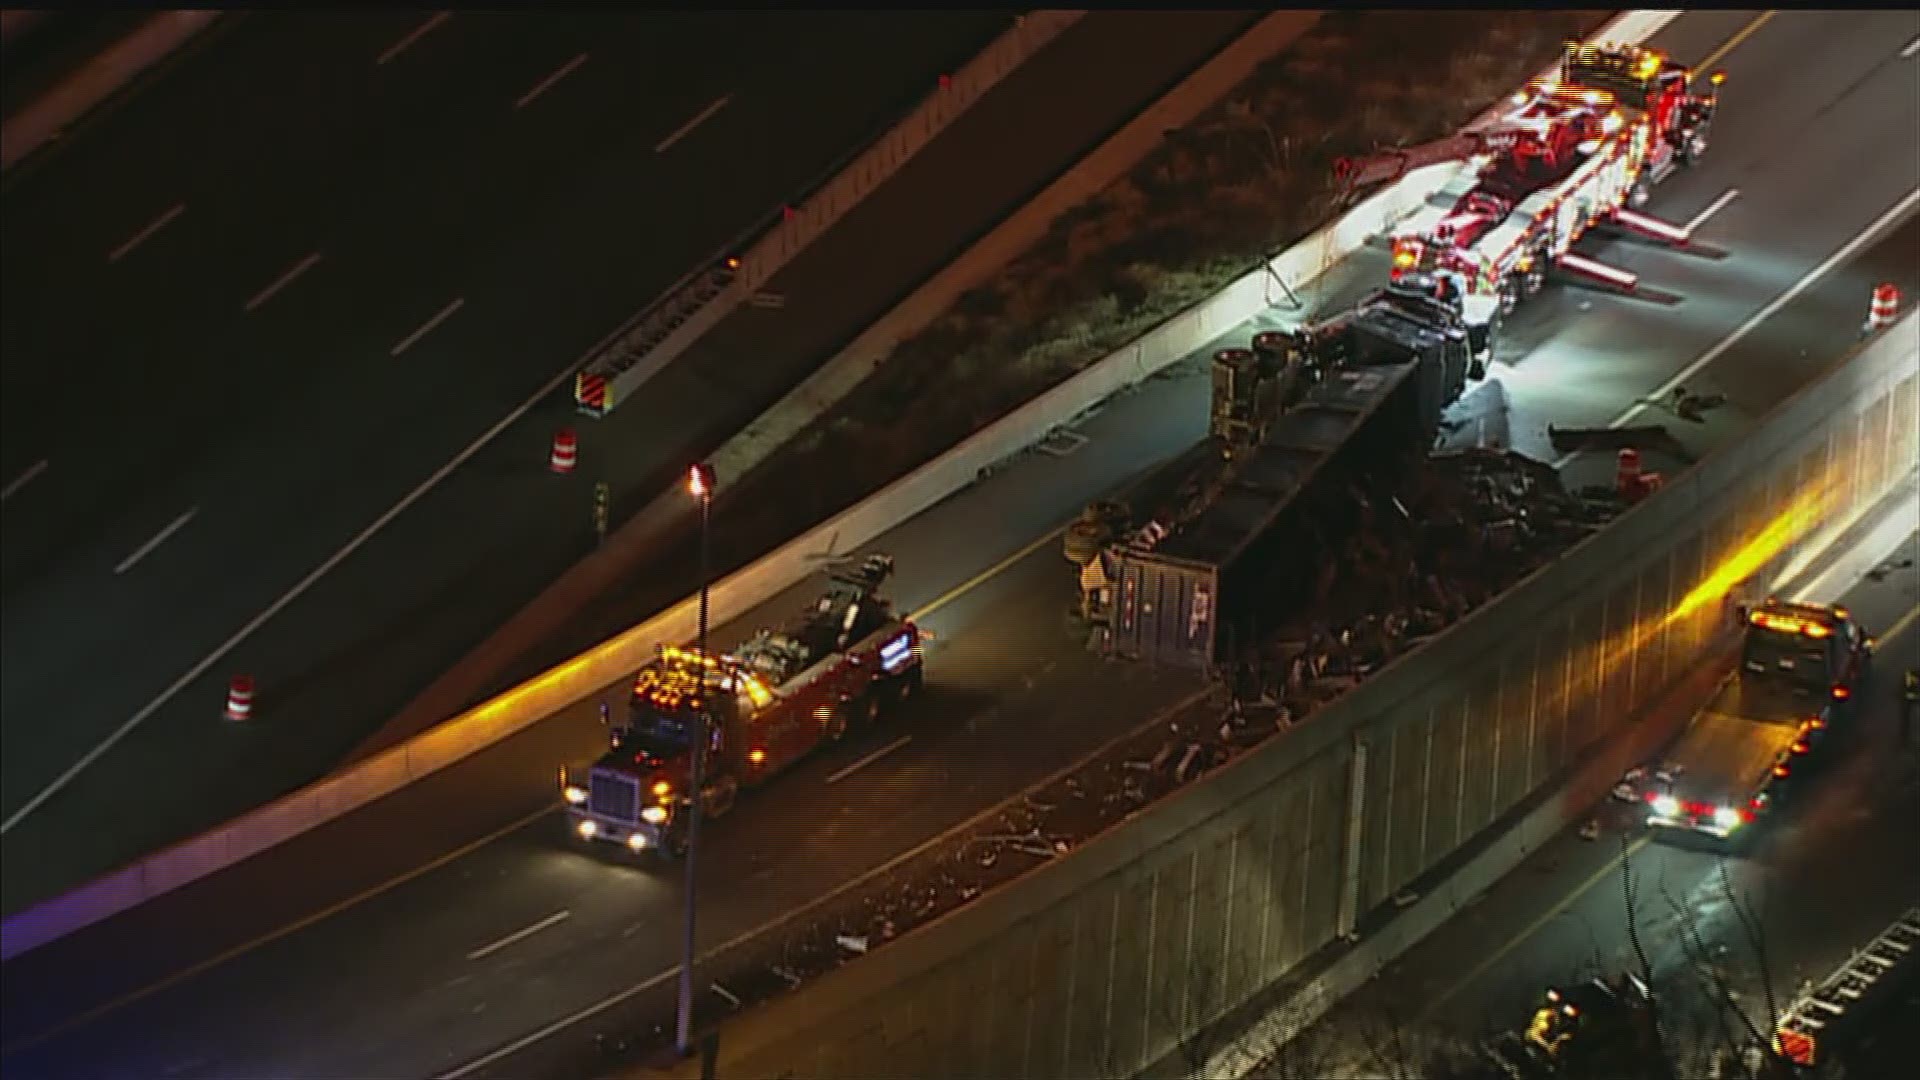 An overturned truck carrying metal debris spilled on I-66 in Northern Virginia causing traffic backups during the morning rush hour on Wednesday.